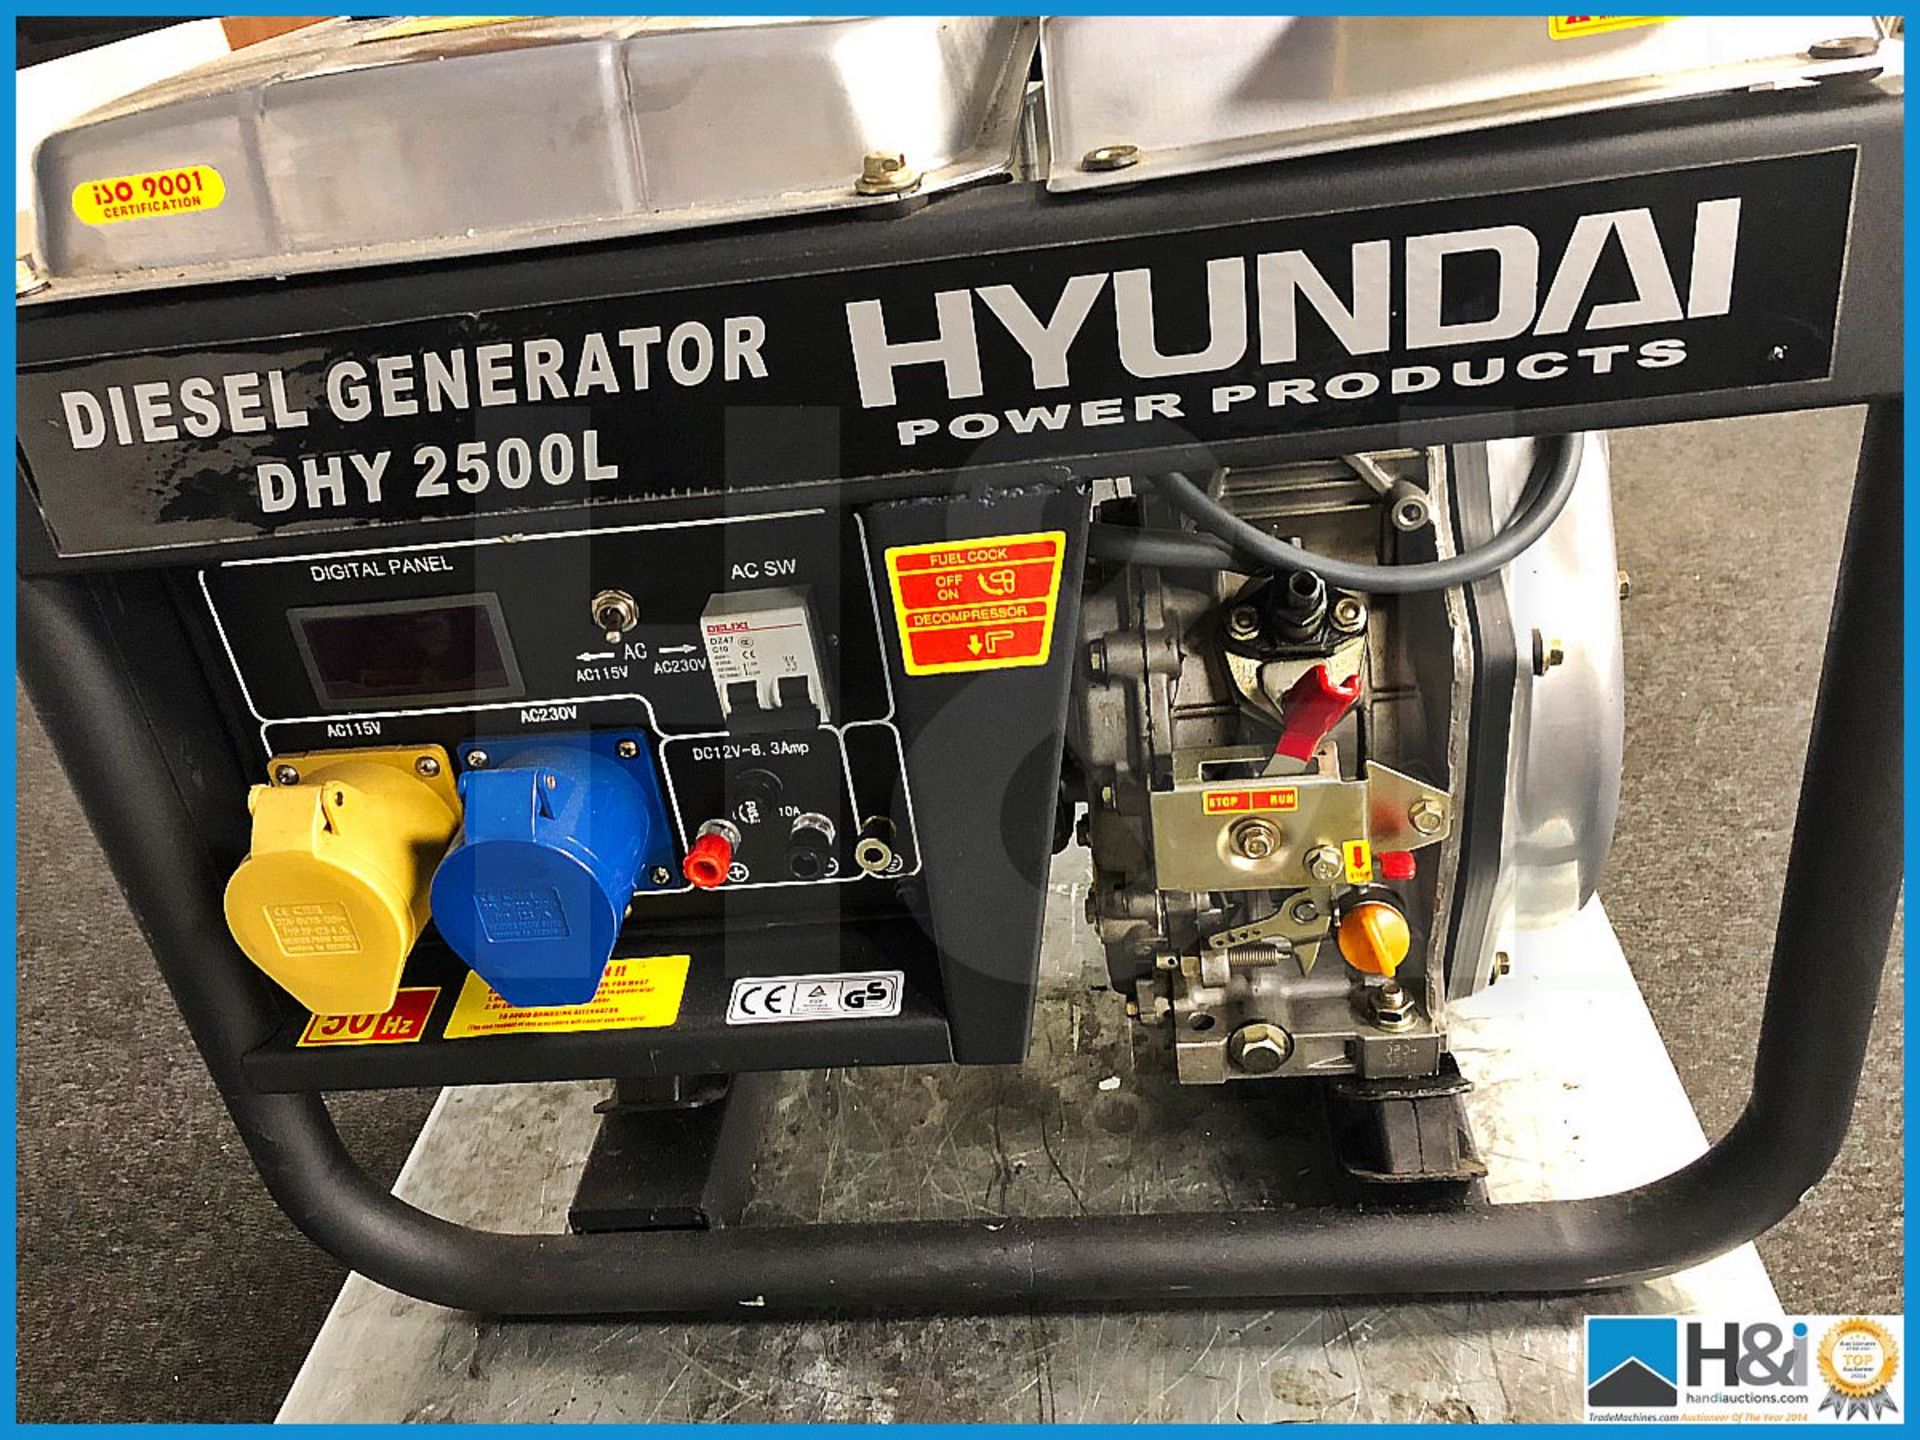 Hyundai DHY2500L diesel generator 3000w. 110v and 240v. Advised missing pull start and possibly othe - Bild 2 aus 7